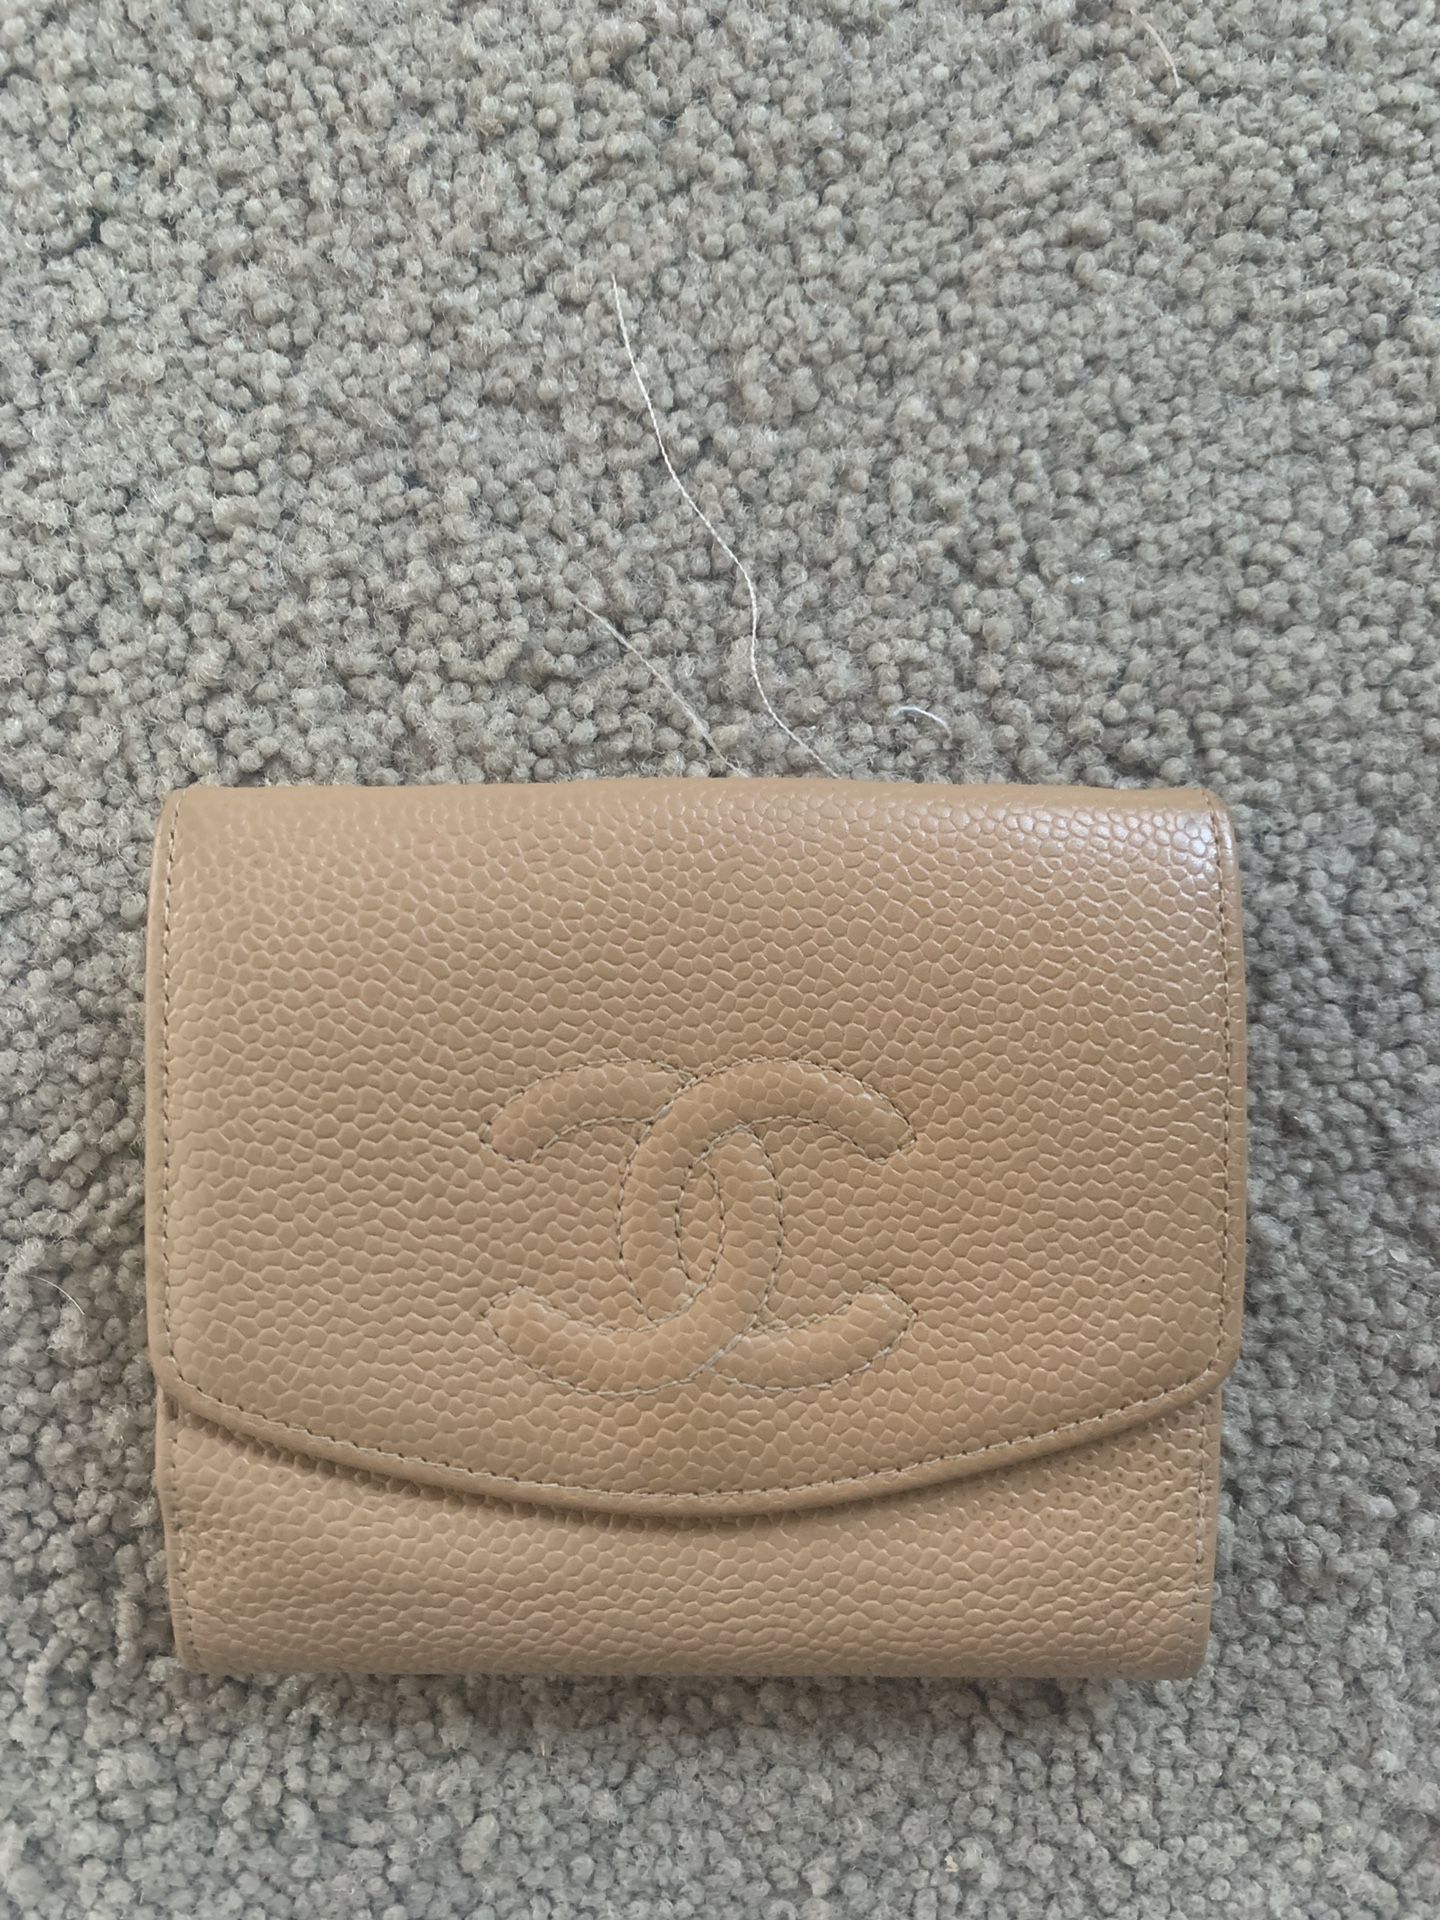 Authentic Chanel wallet/card holder